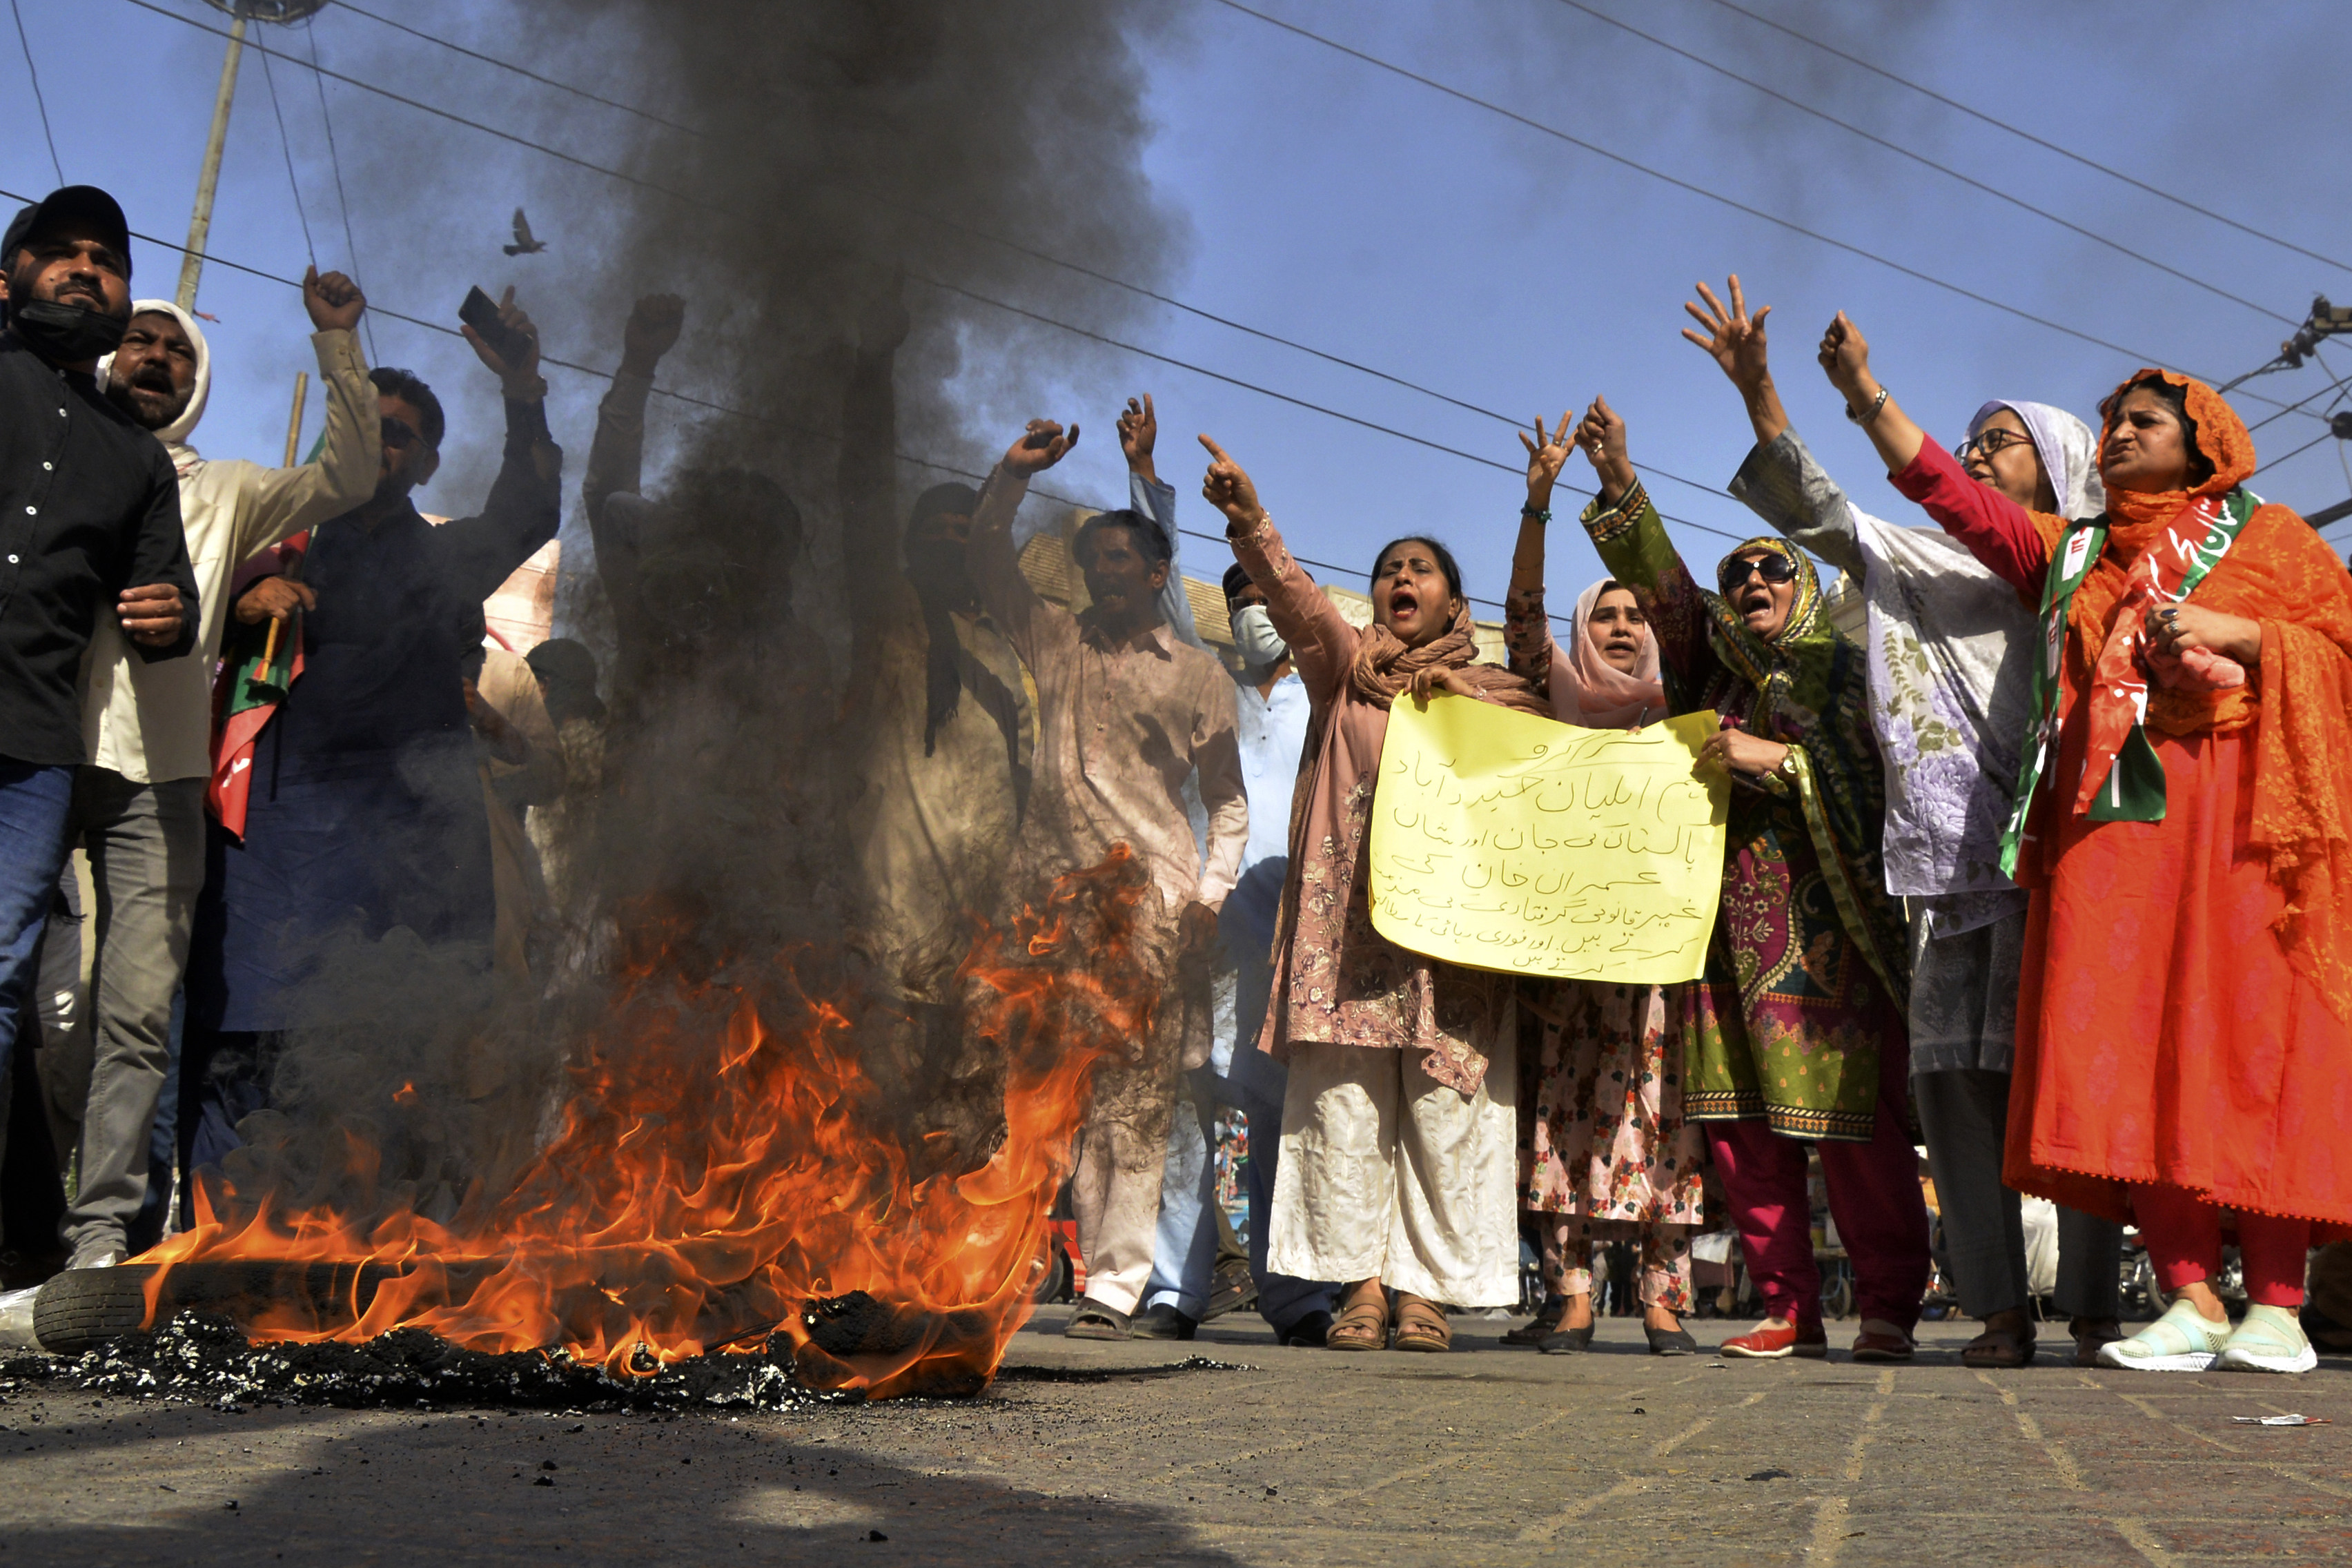 Supporters of Imran Khan in Hyderabad, Pakistan, chant slogans next to burning tyres to condemn his arrest. Photo: AP